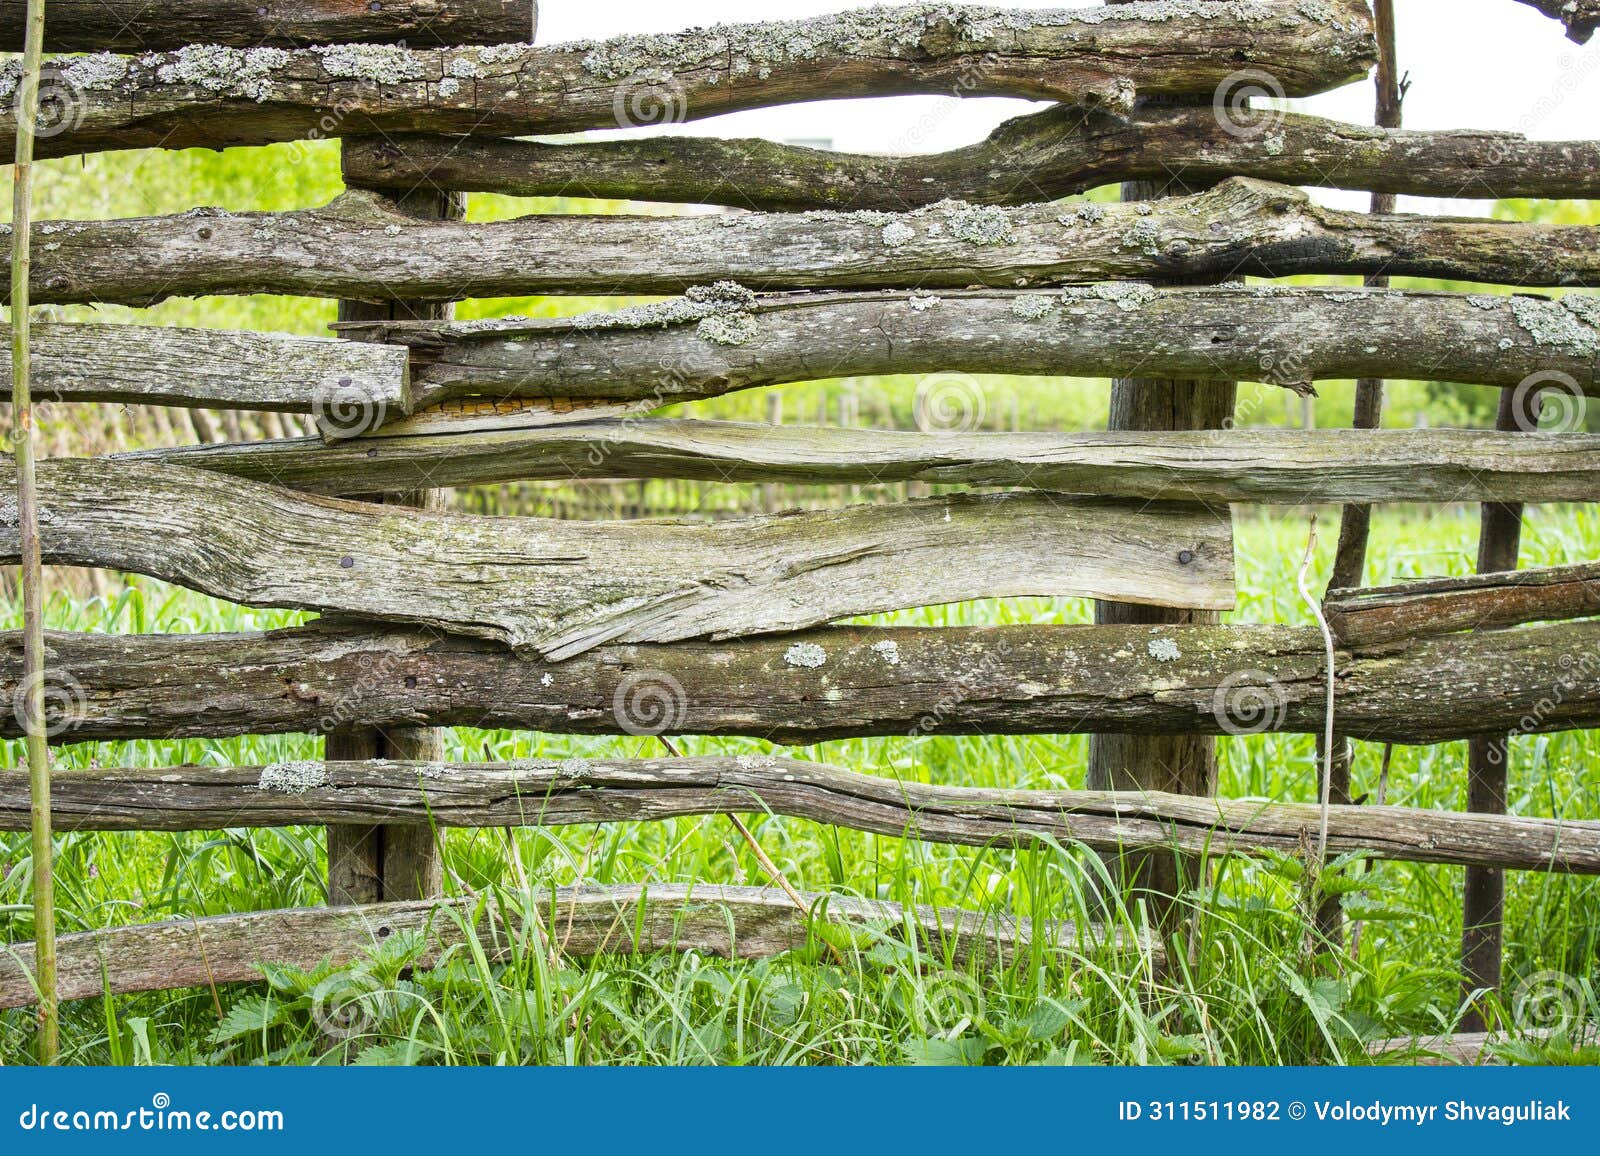 old wooden fence in the village. rural life of people in nature